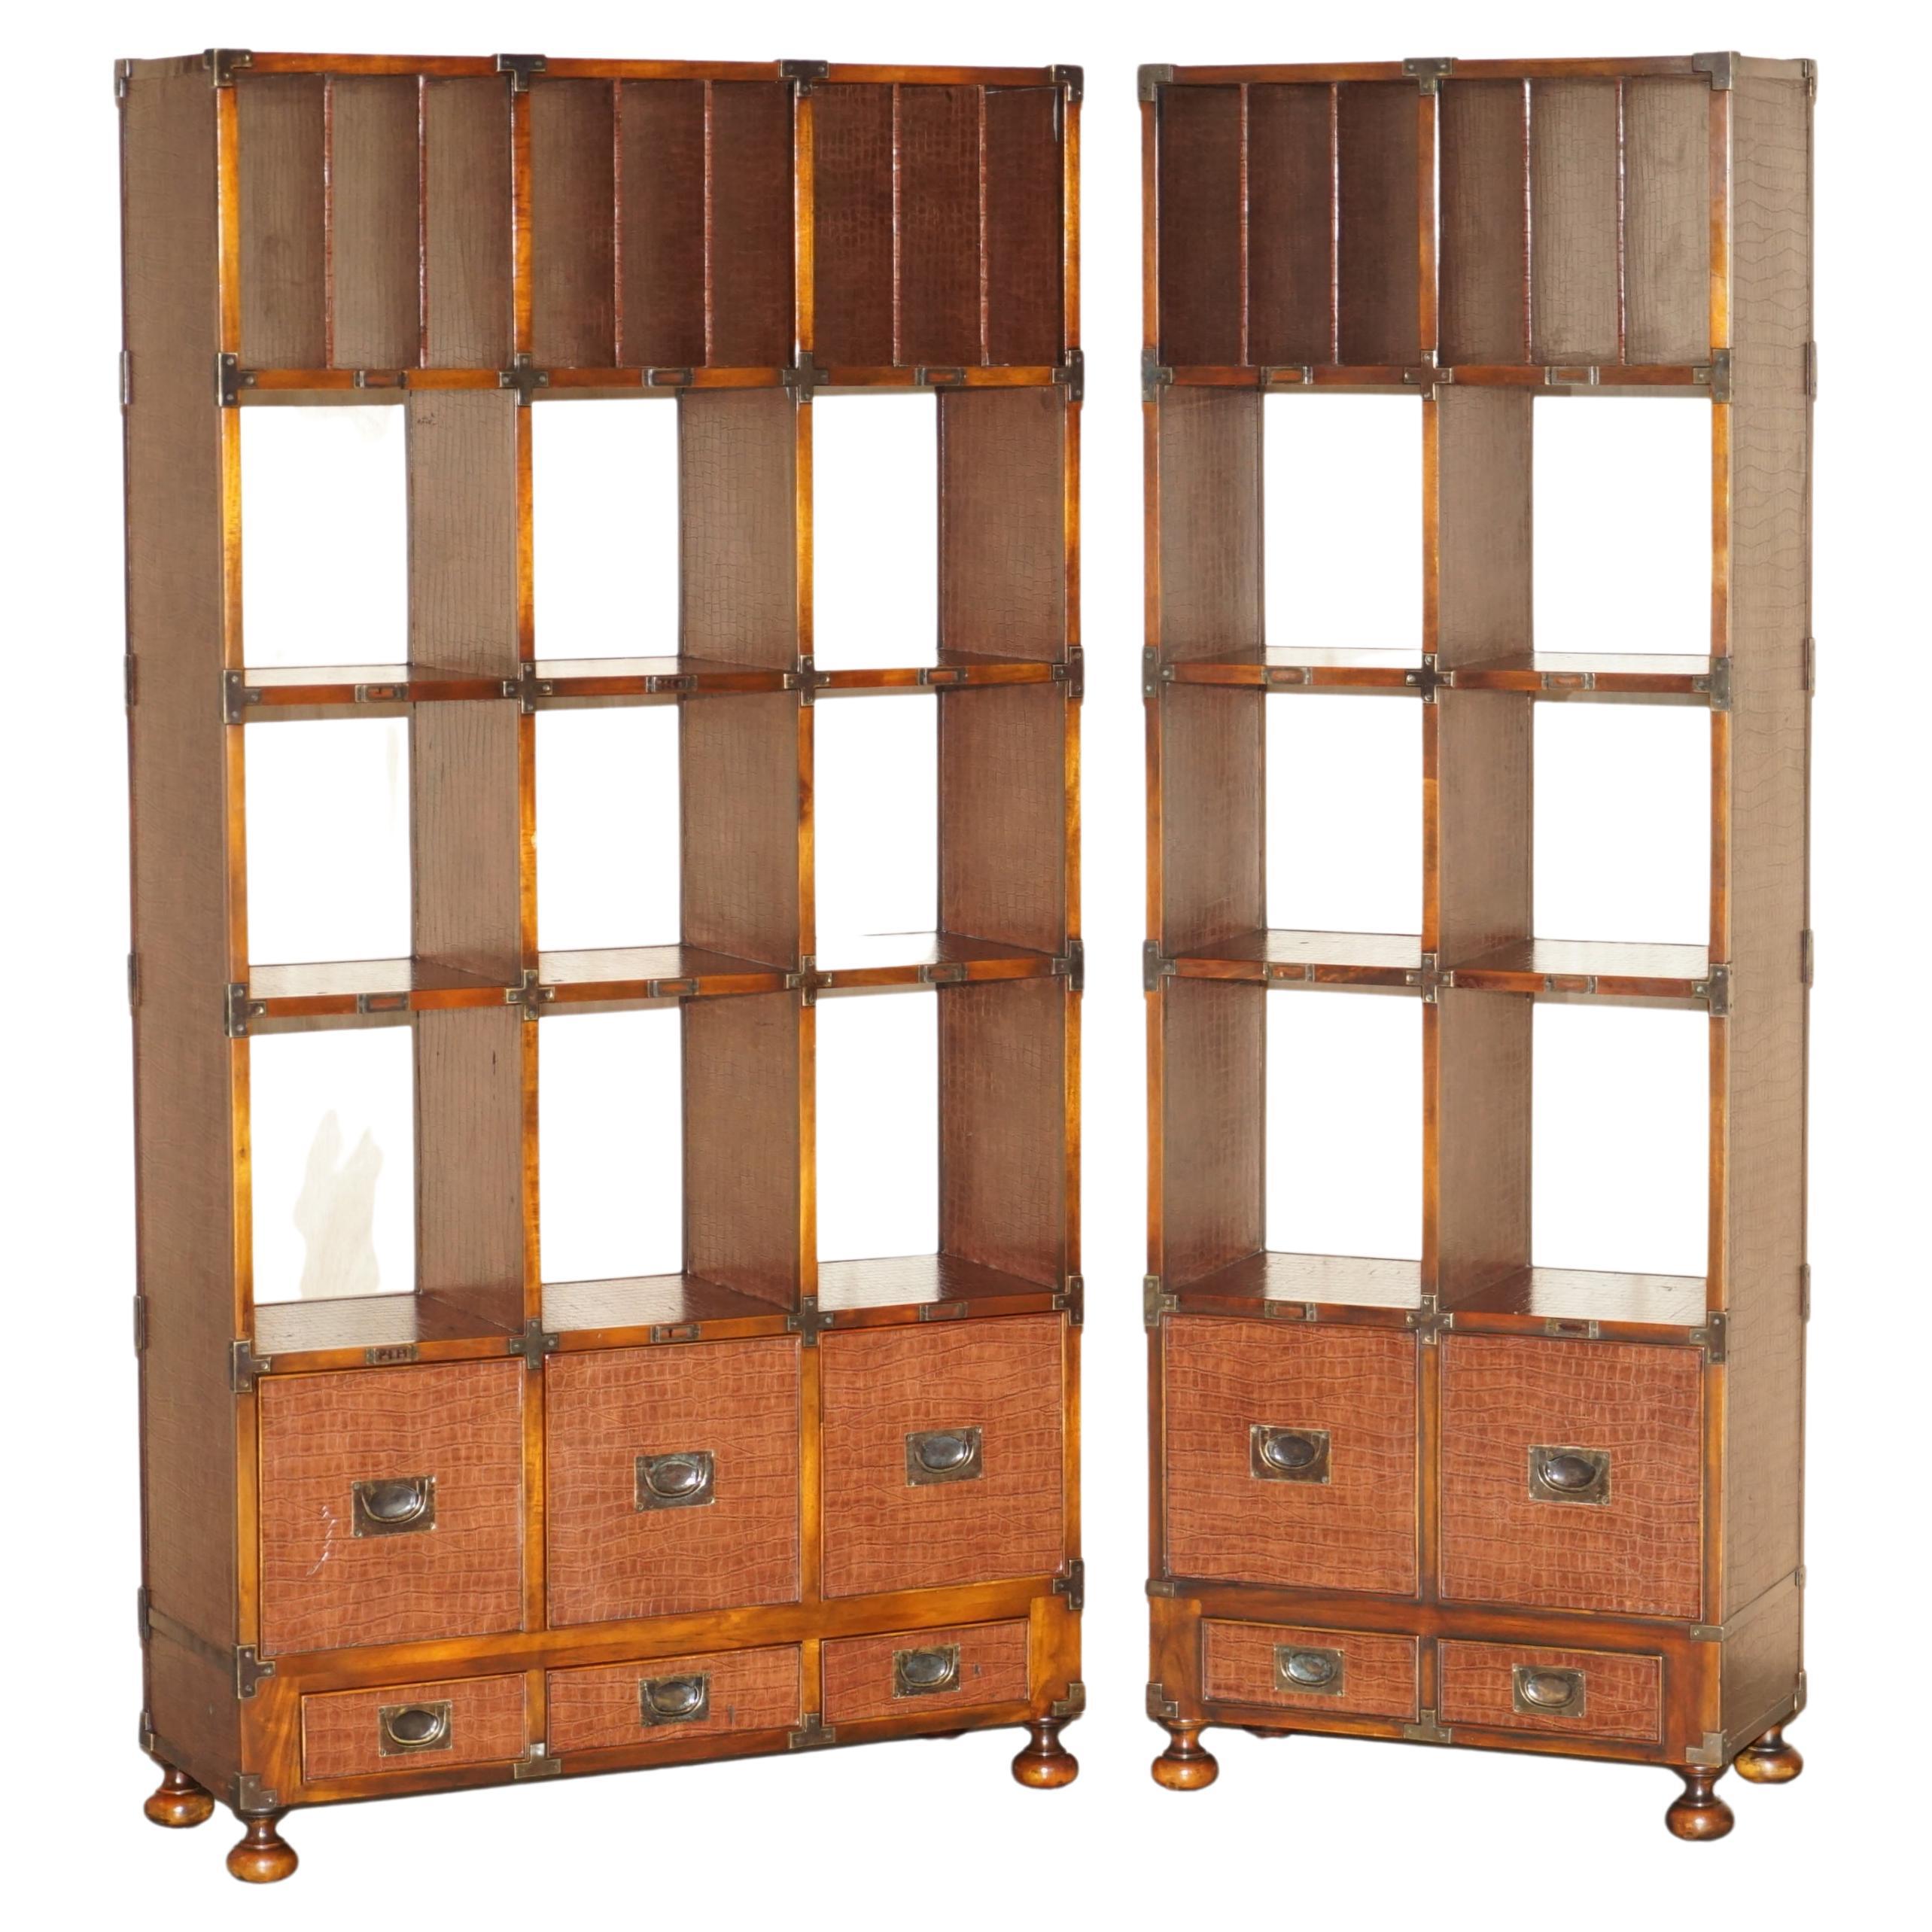 PAIR OF CROCODILE LEATHER Offene LiBRARY-BOOKCASES MIT DRAWERS & RECORD SLOTS im Angebot